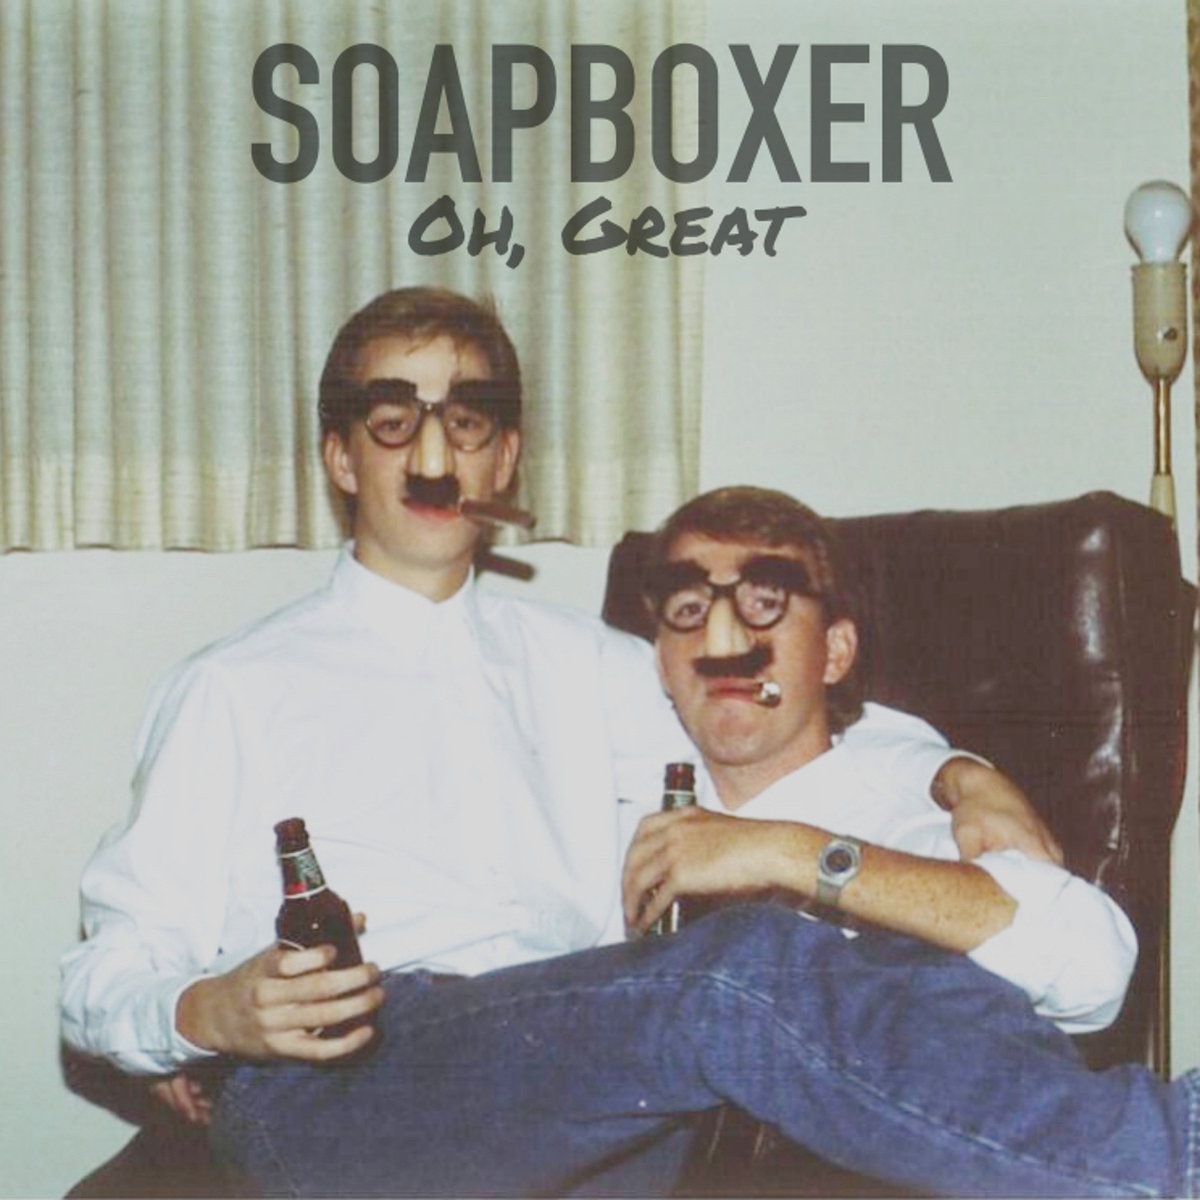 Oh, Great — Soapboxer